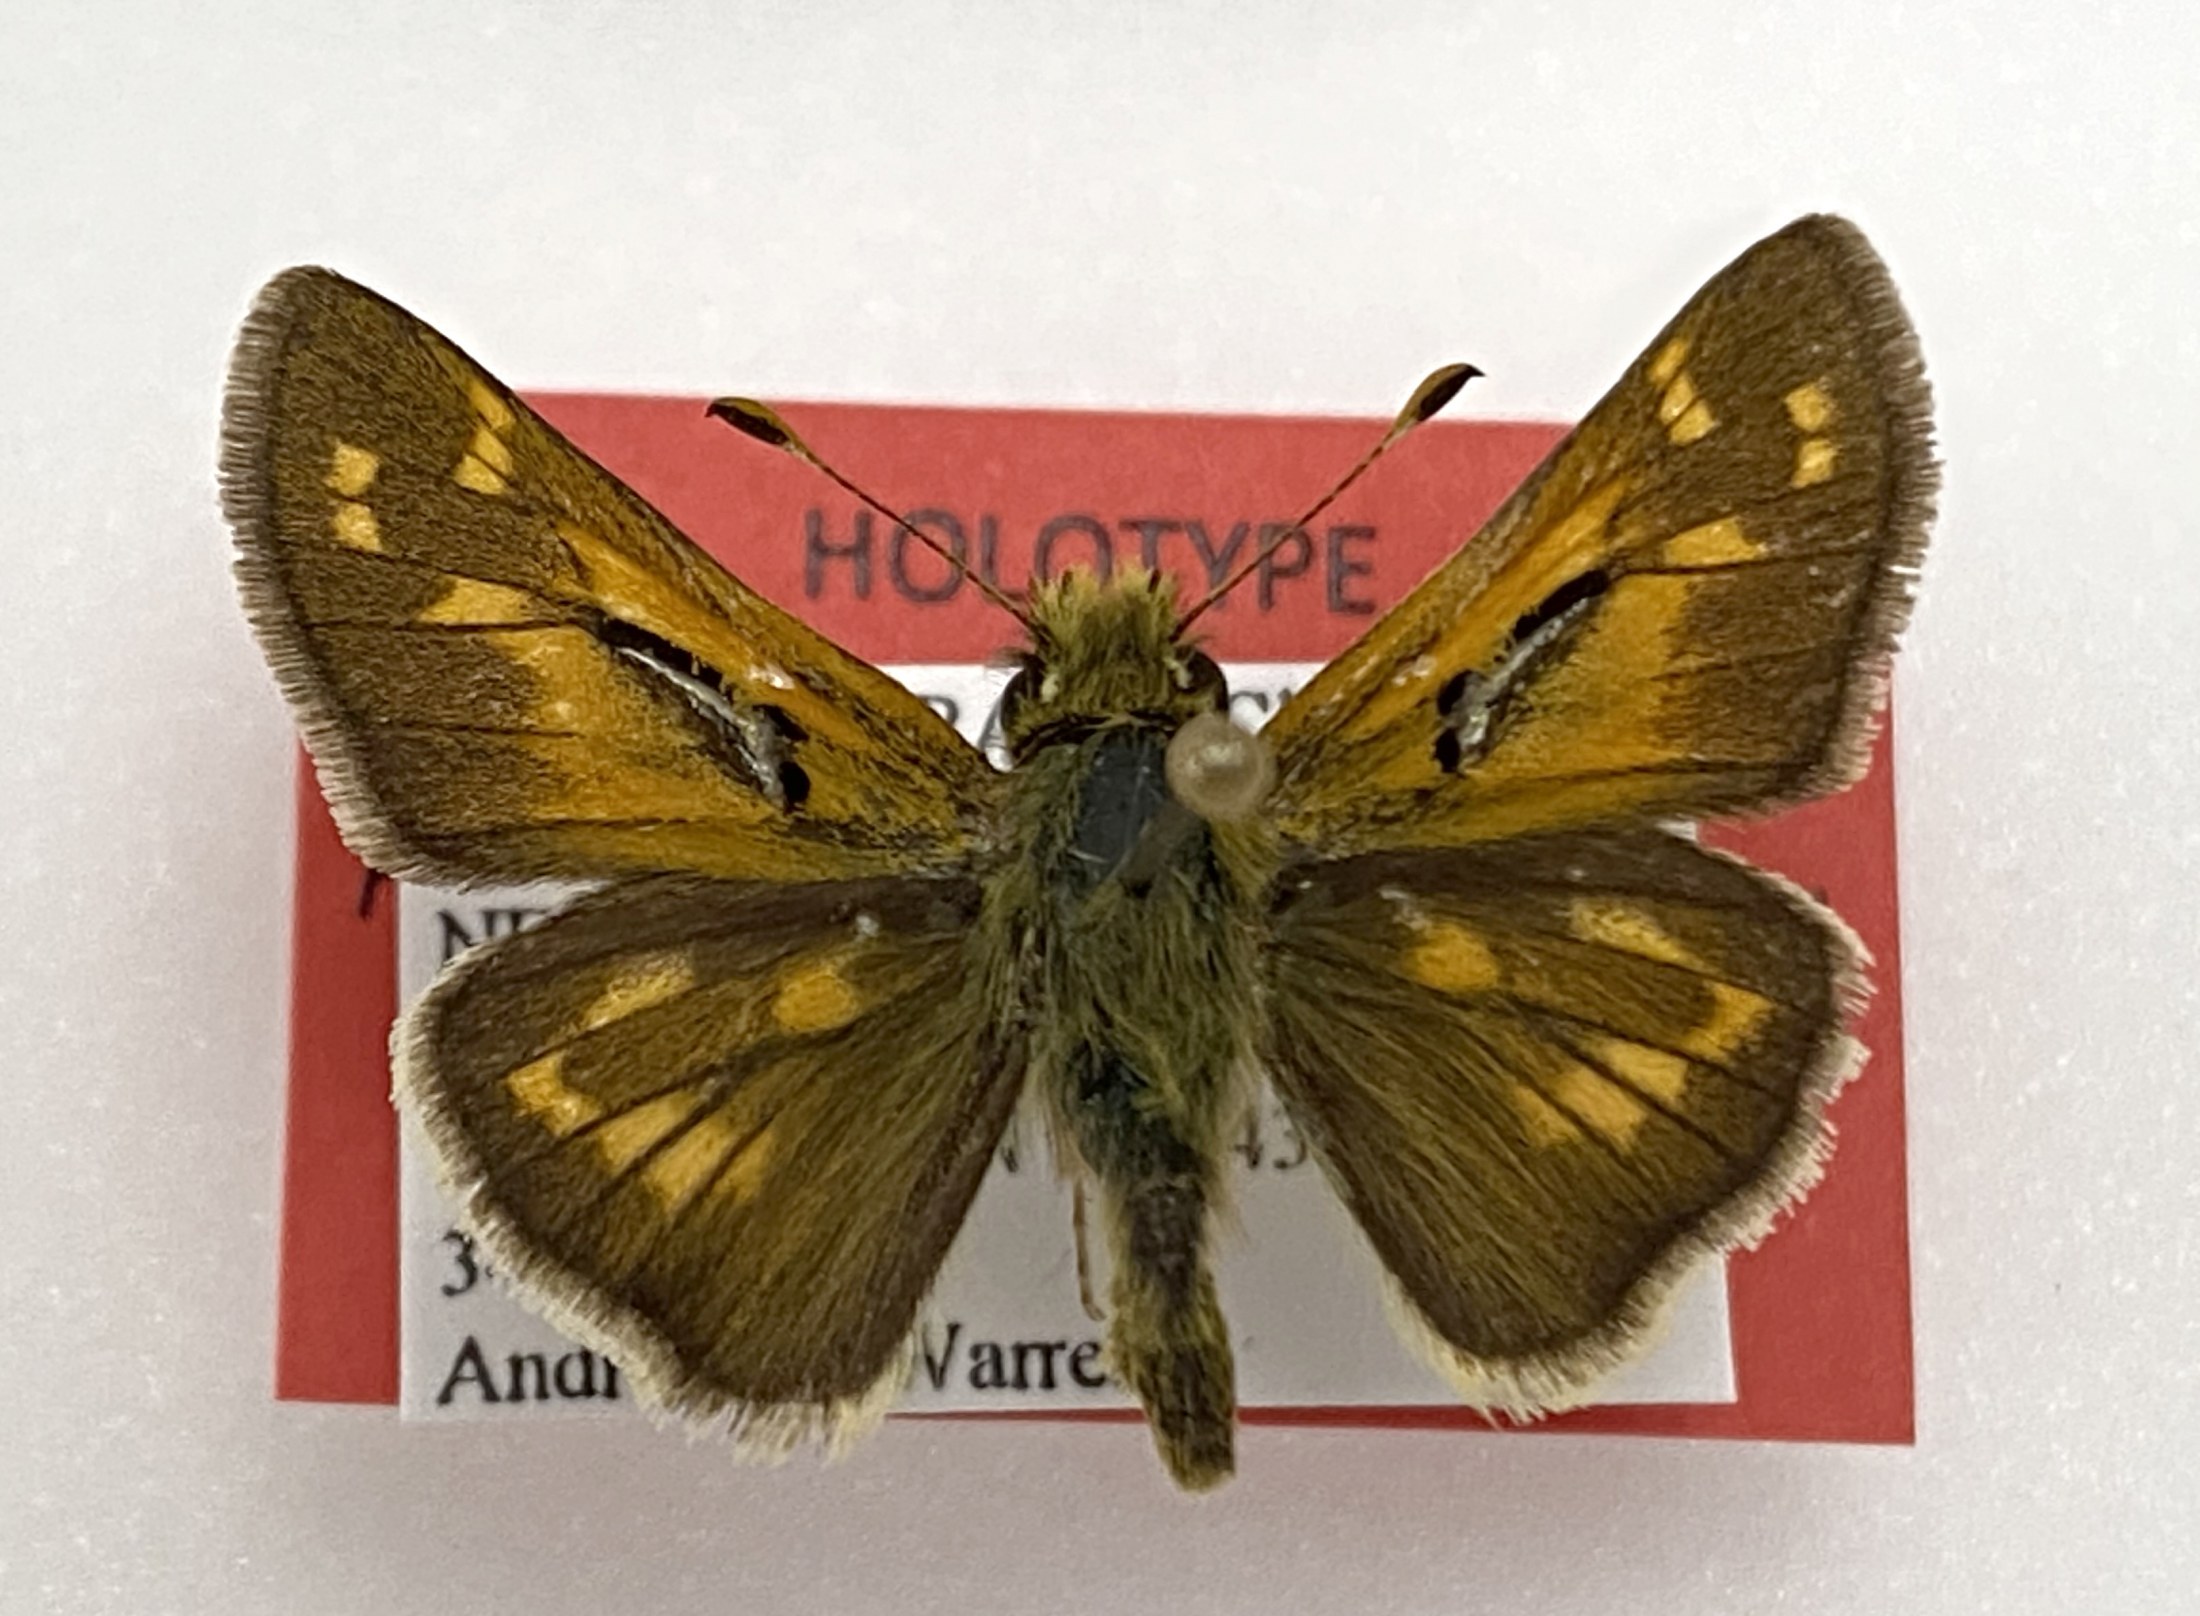 Picture of a pinned brown skipper butterfly with a white data label and red holotype label.